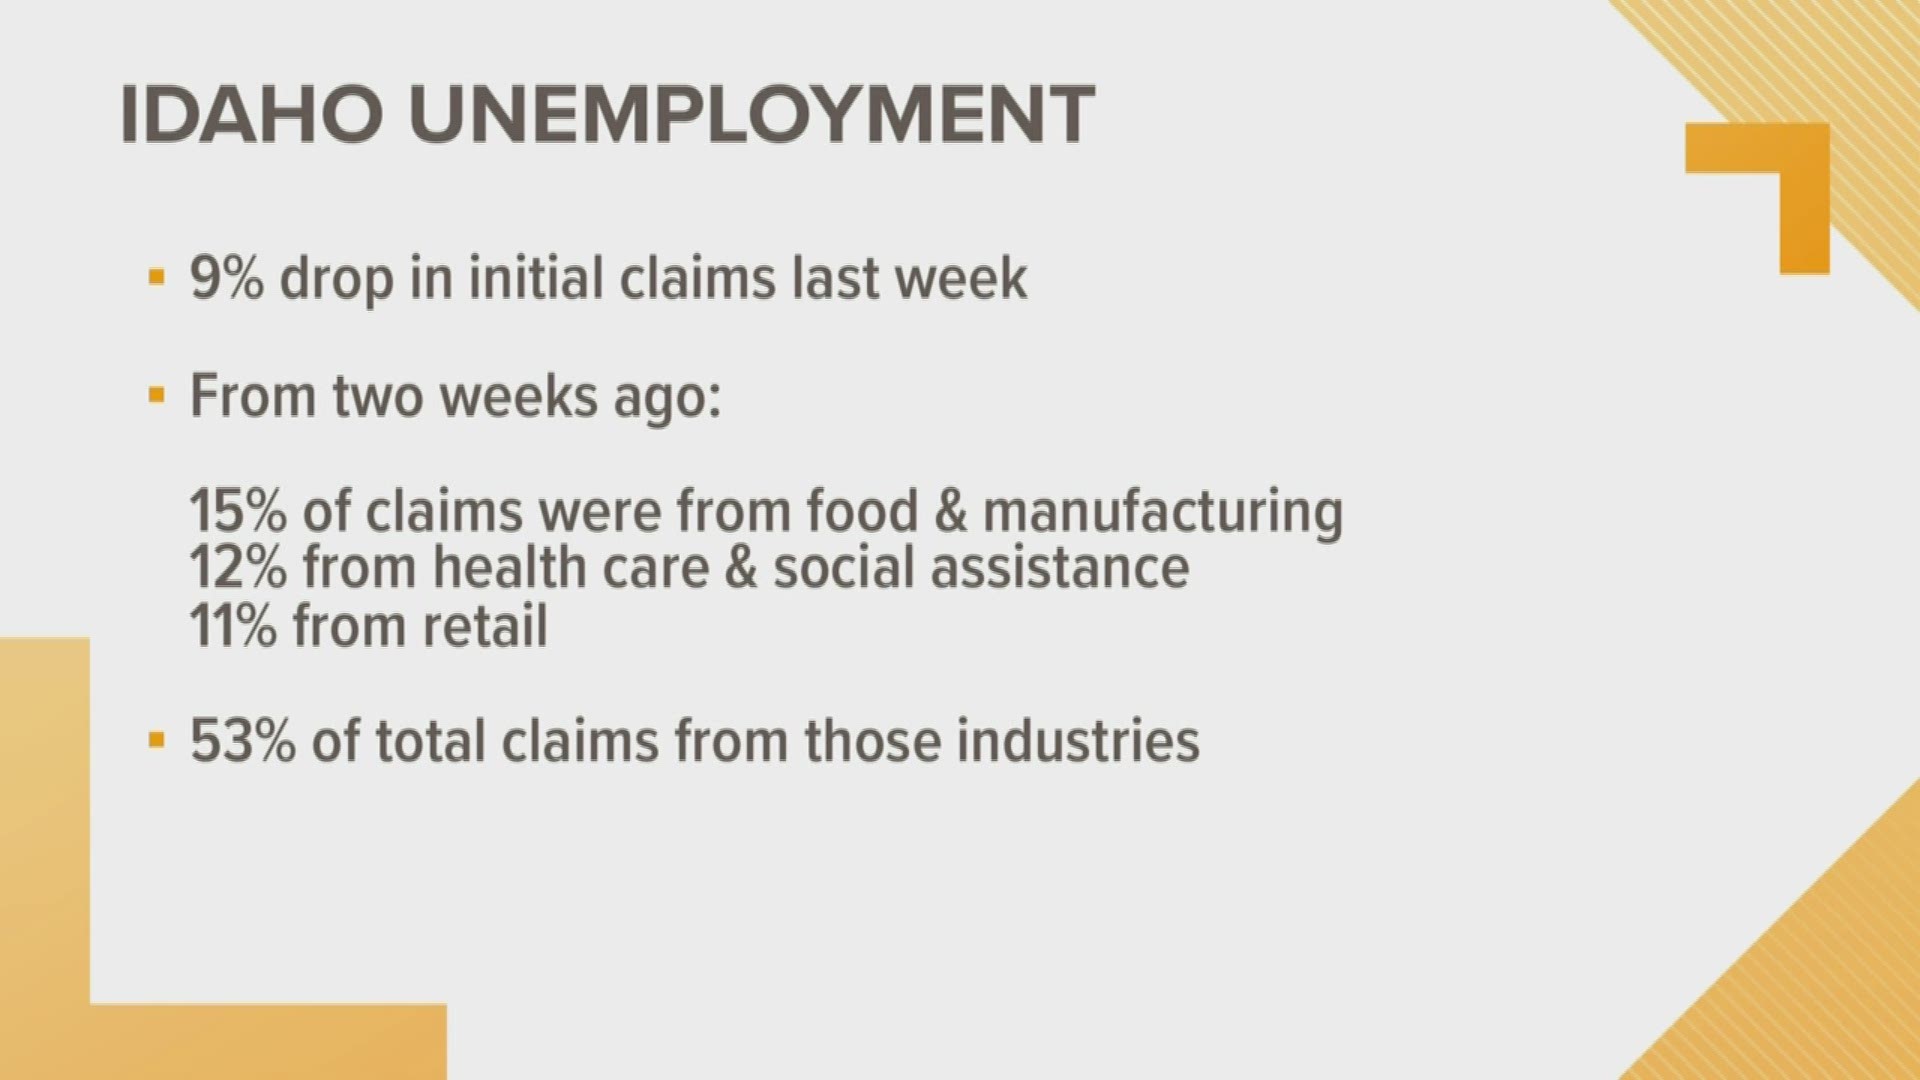 The Idaho Department of Labor said Thursday that there were 4,024 initial claims for the week ending July 4. That’s a drop of 493 claims from the previous week.